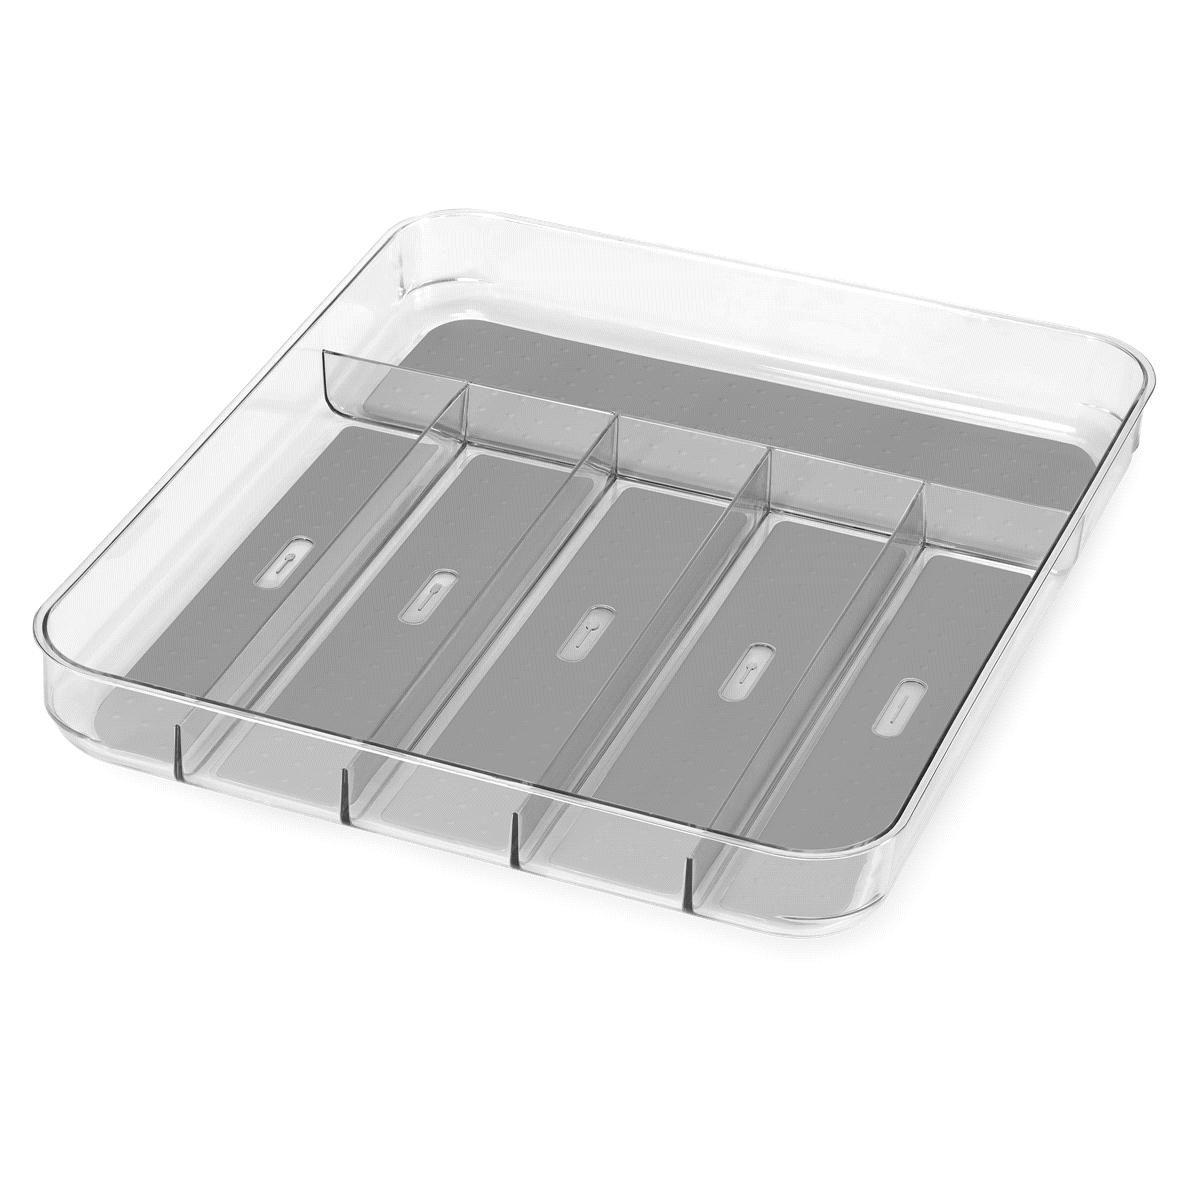 slide 1 of 1, madesmart Large Soft Grip Silverware Tray - Clear/Gray, 1 ct